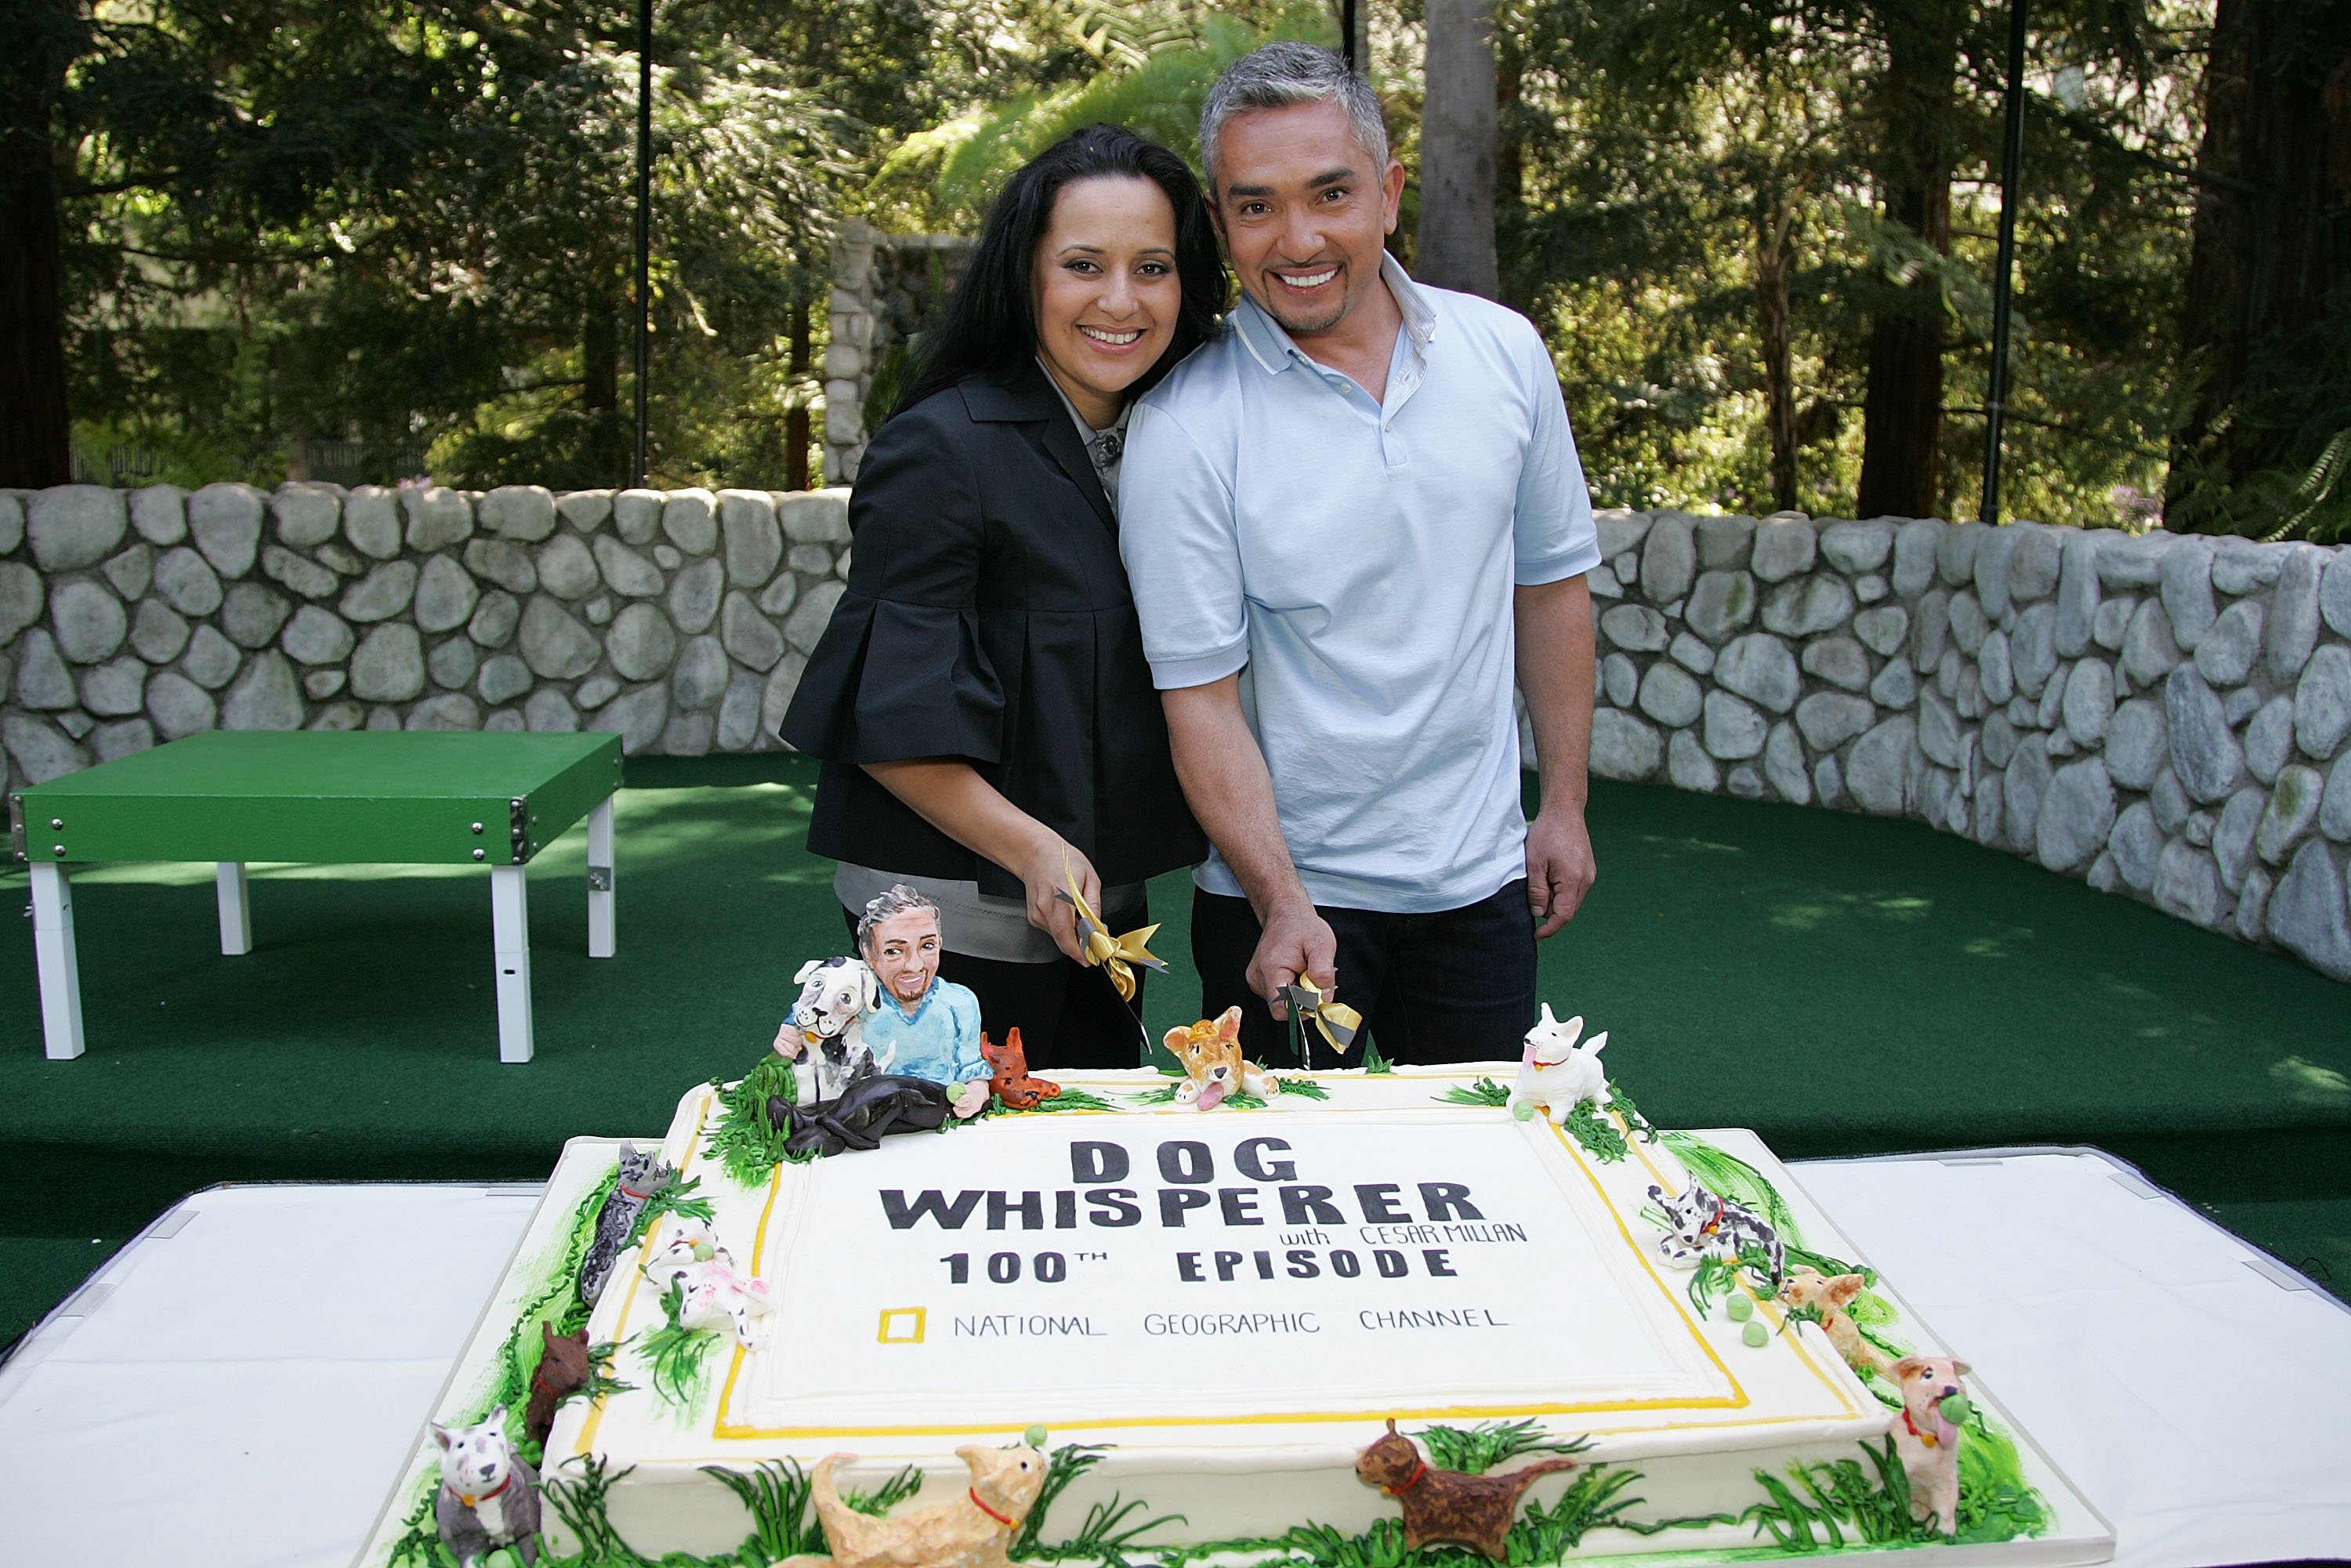 Cesar Millan and wife Illusion at the taping of the 100th episode of National Geographic Channel's "Dog Whisperer" at Pickwick Gardens March 30, 2008, in Burbank, California. Source: Getty Images